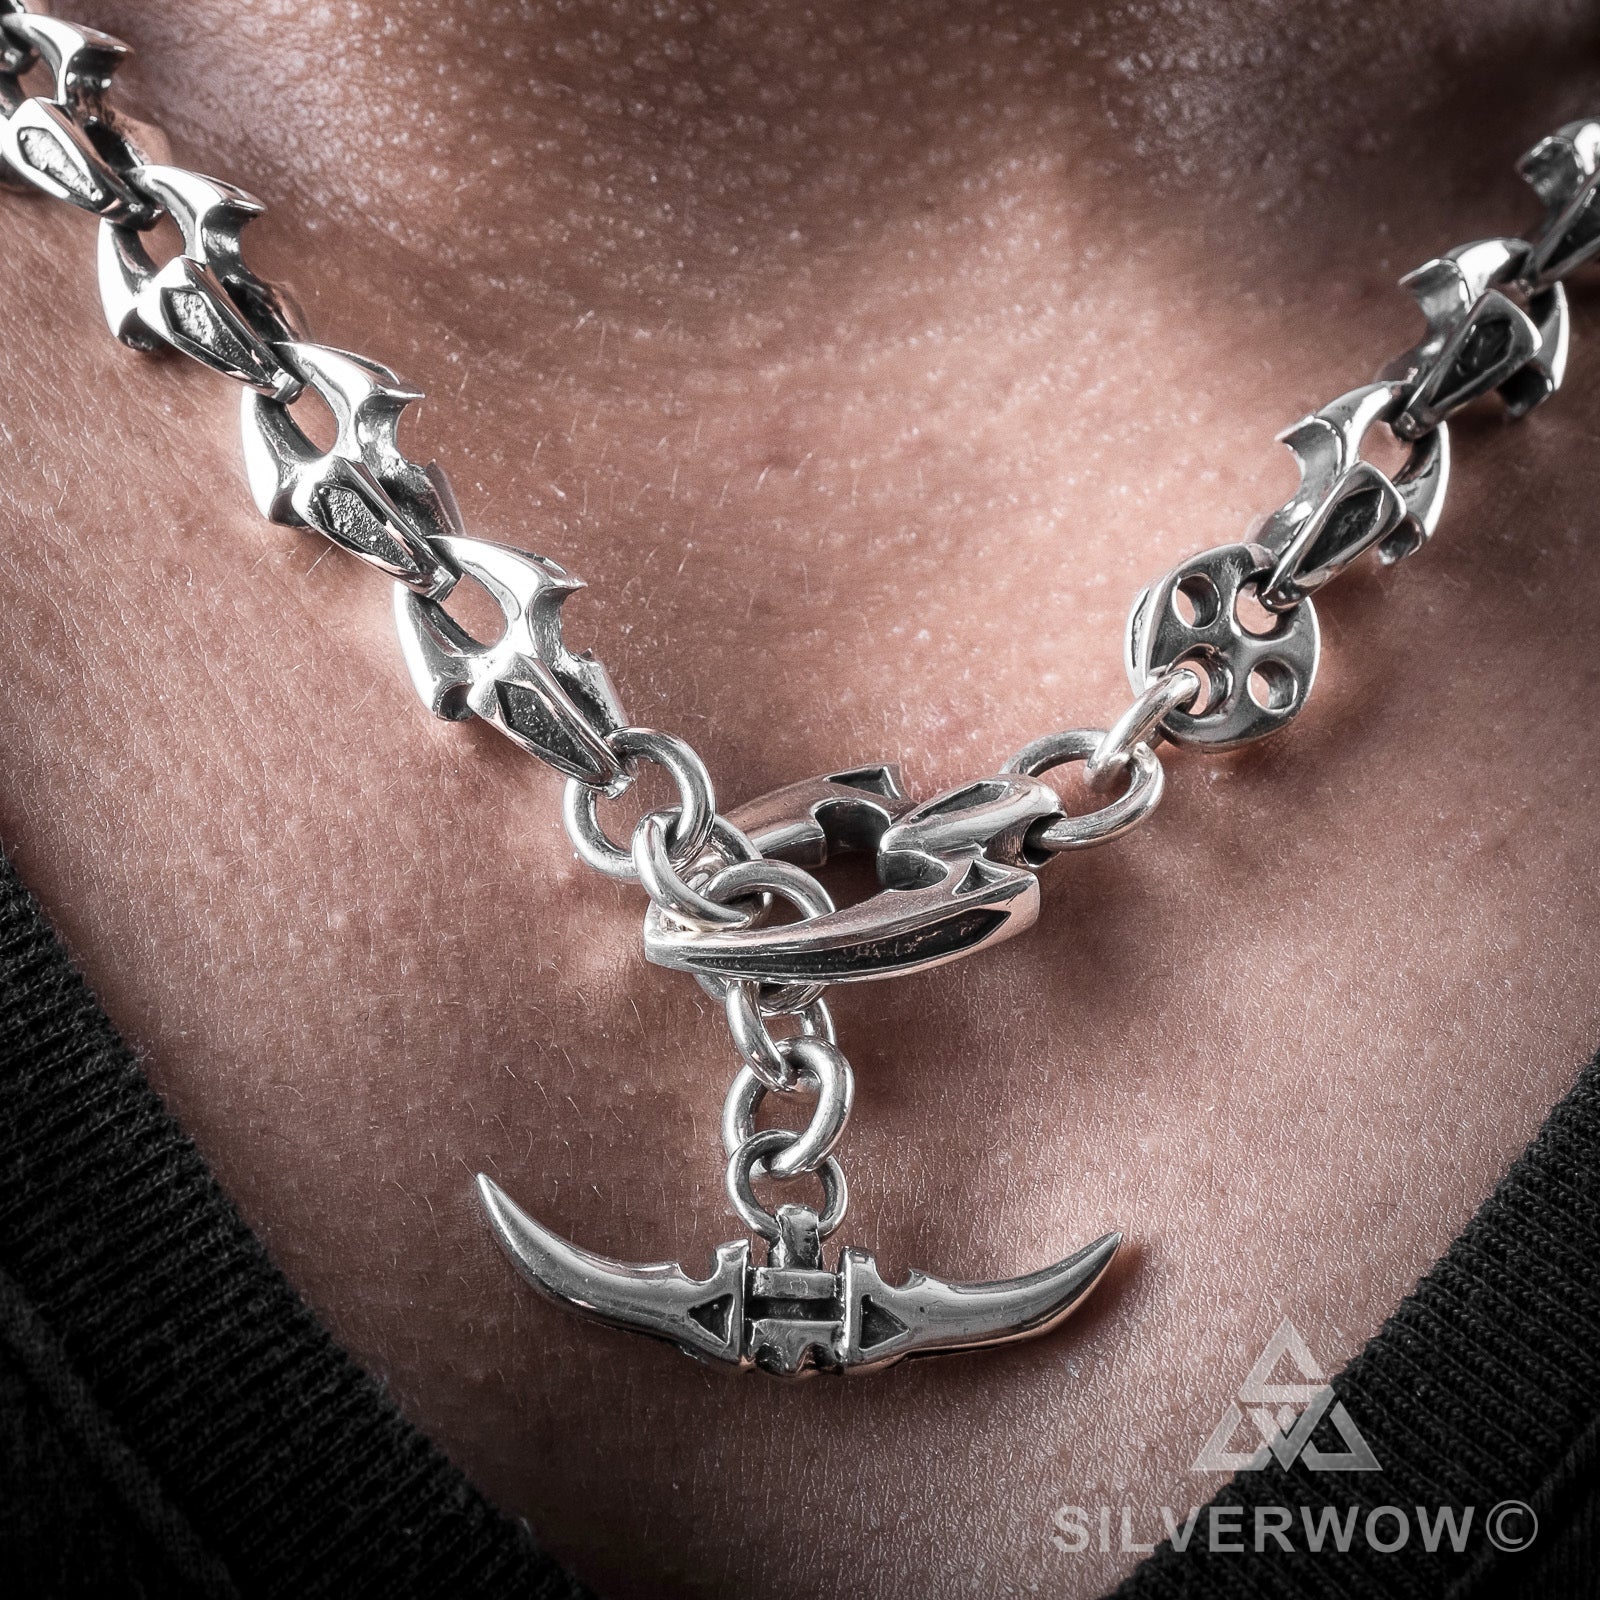 Shark Mens Toggle Necklace, silver t bar chain